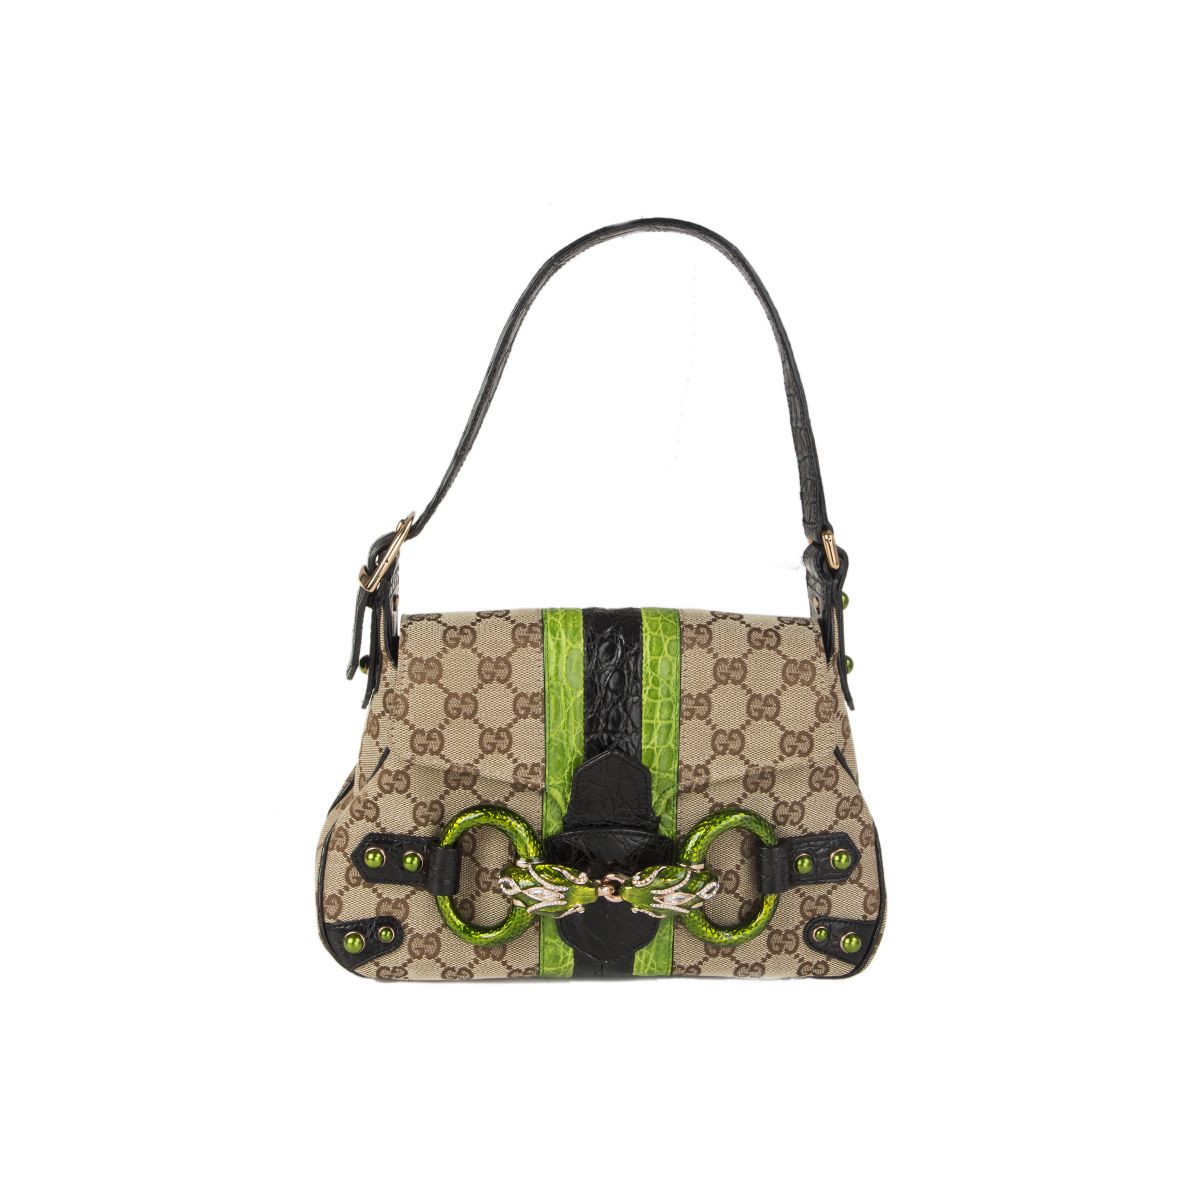 Gucci Limited Edition Beige GG Canvas Croc Embossed Tom Ford